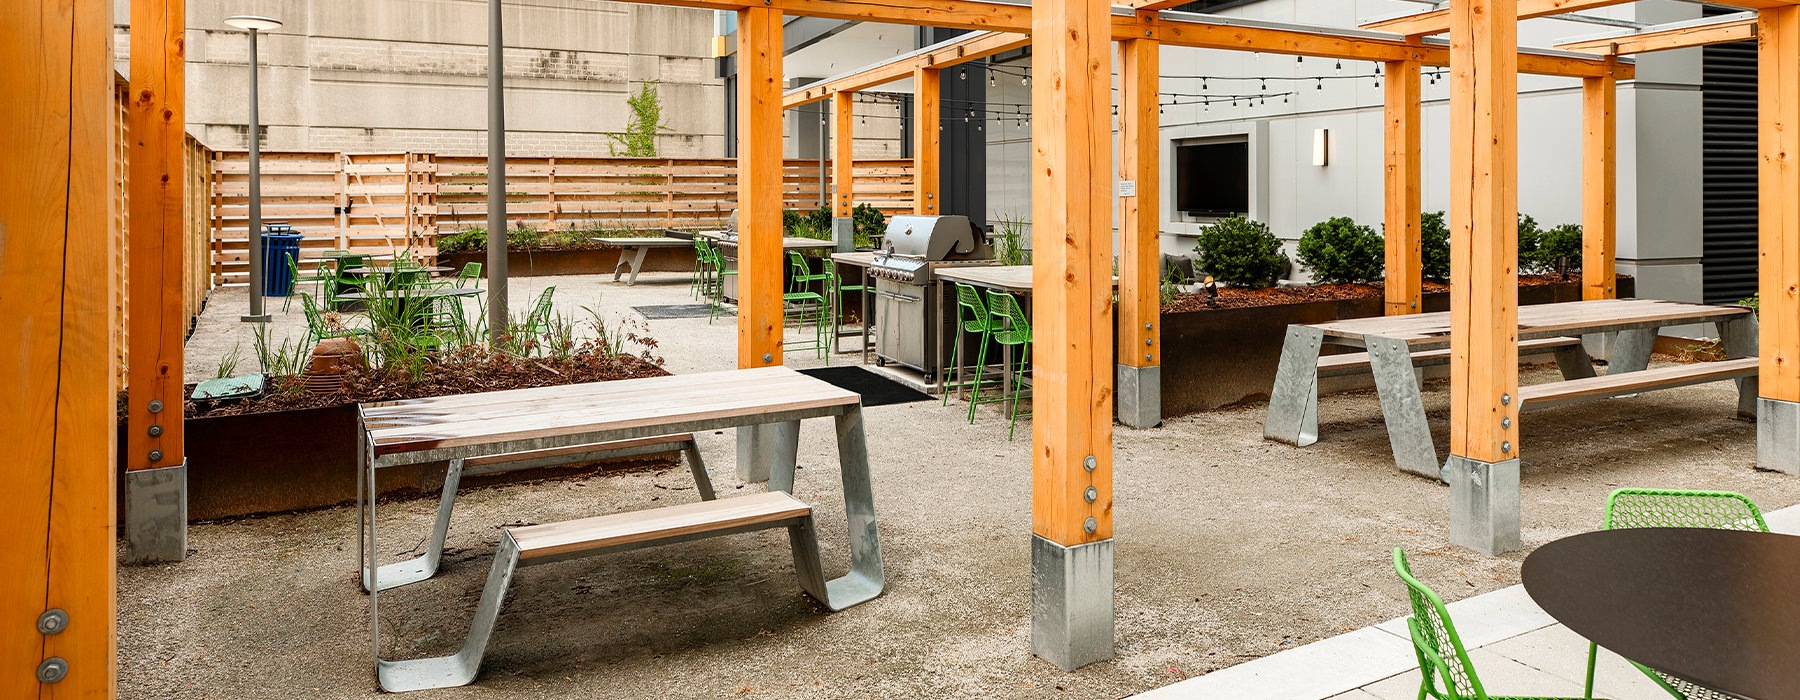 Outdoor community space with tables and a grill